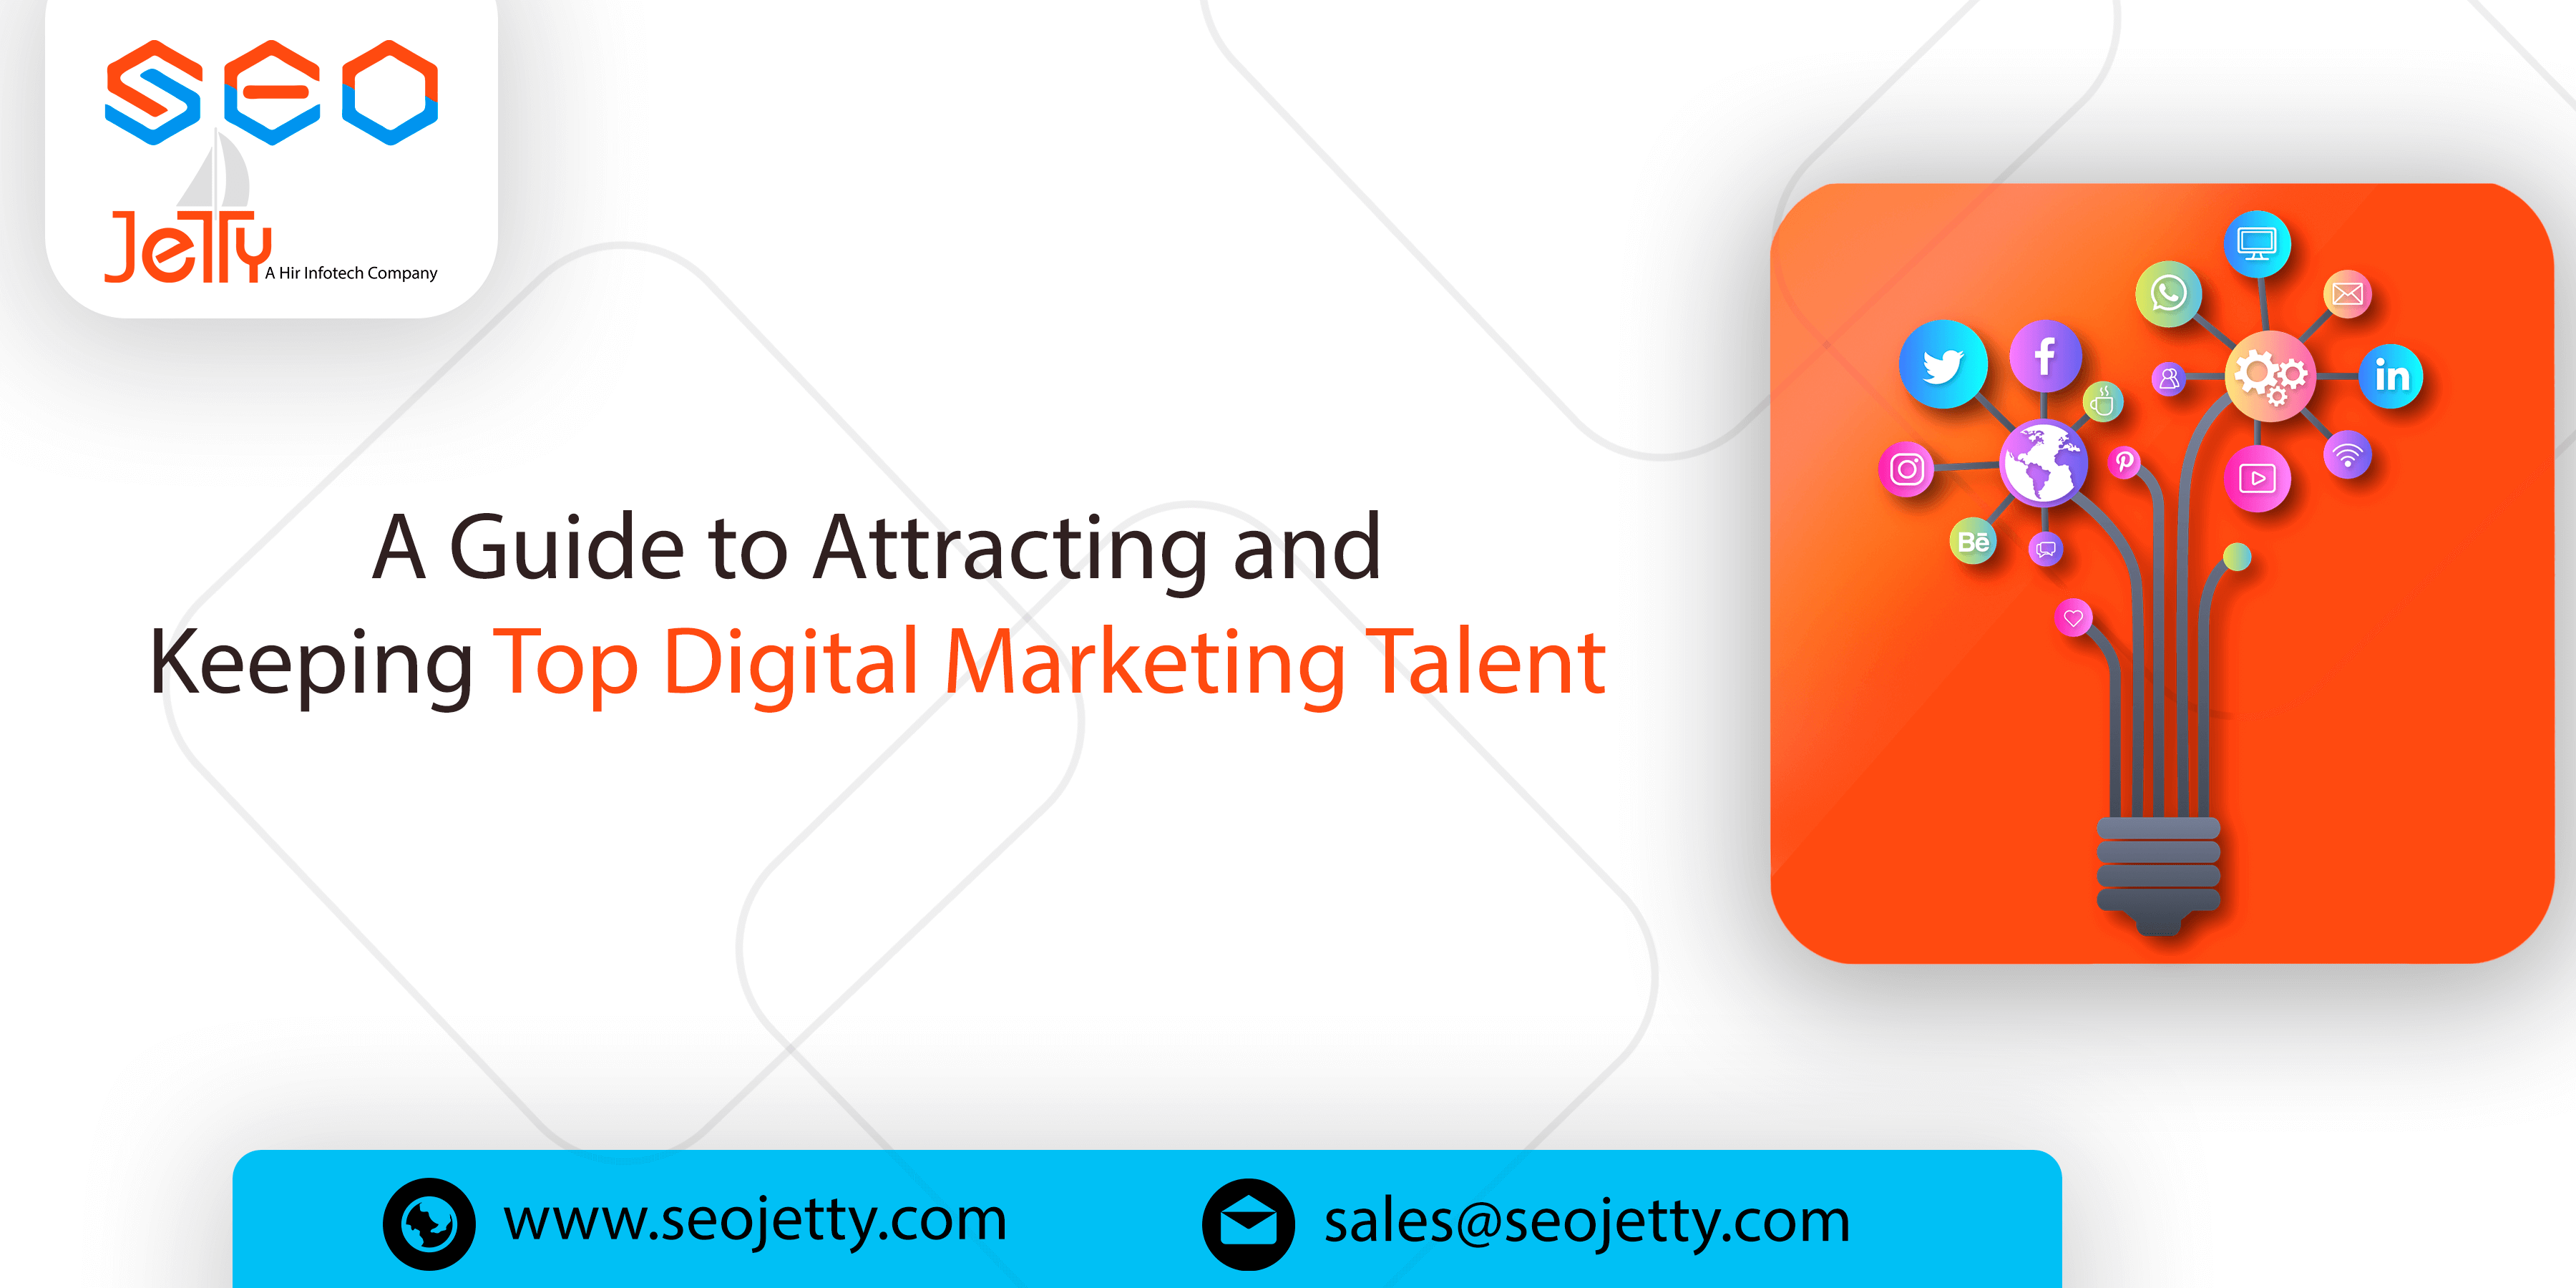 A Guide to Attracting and Keeping Top Digital Marketing Talent